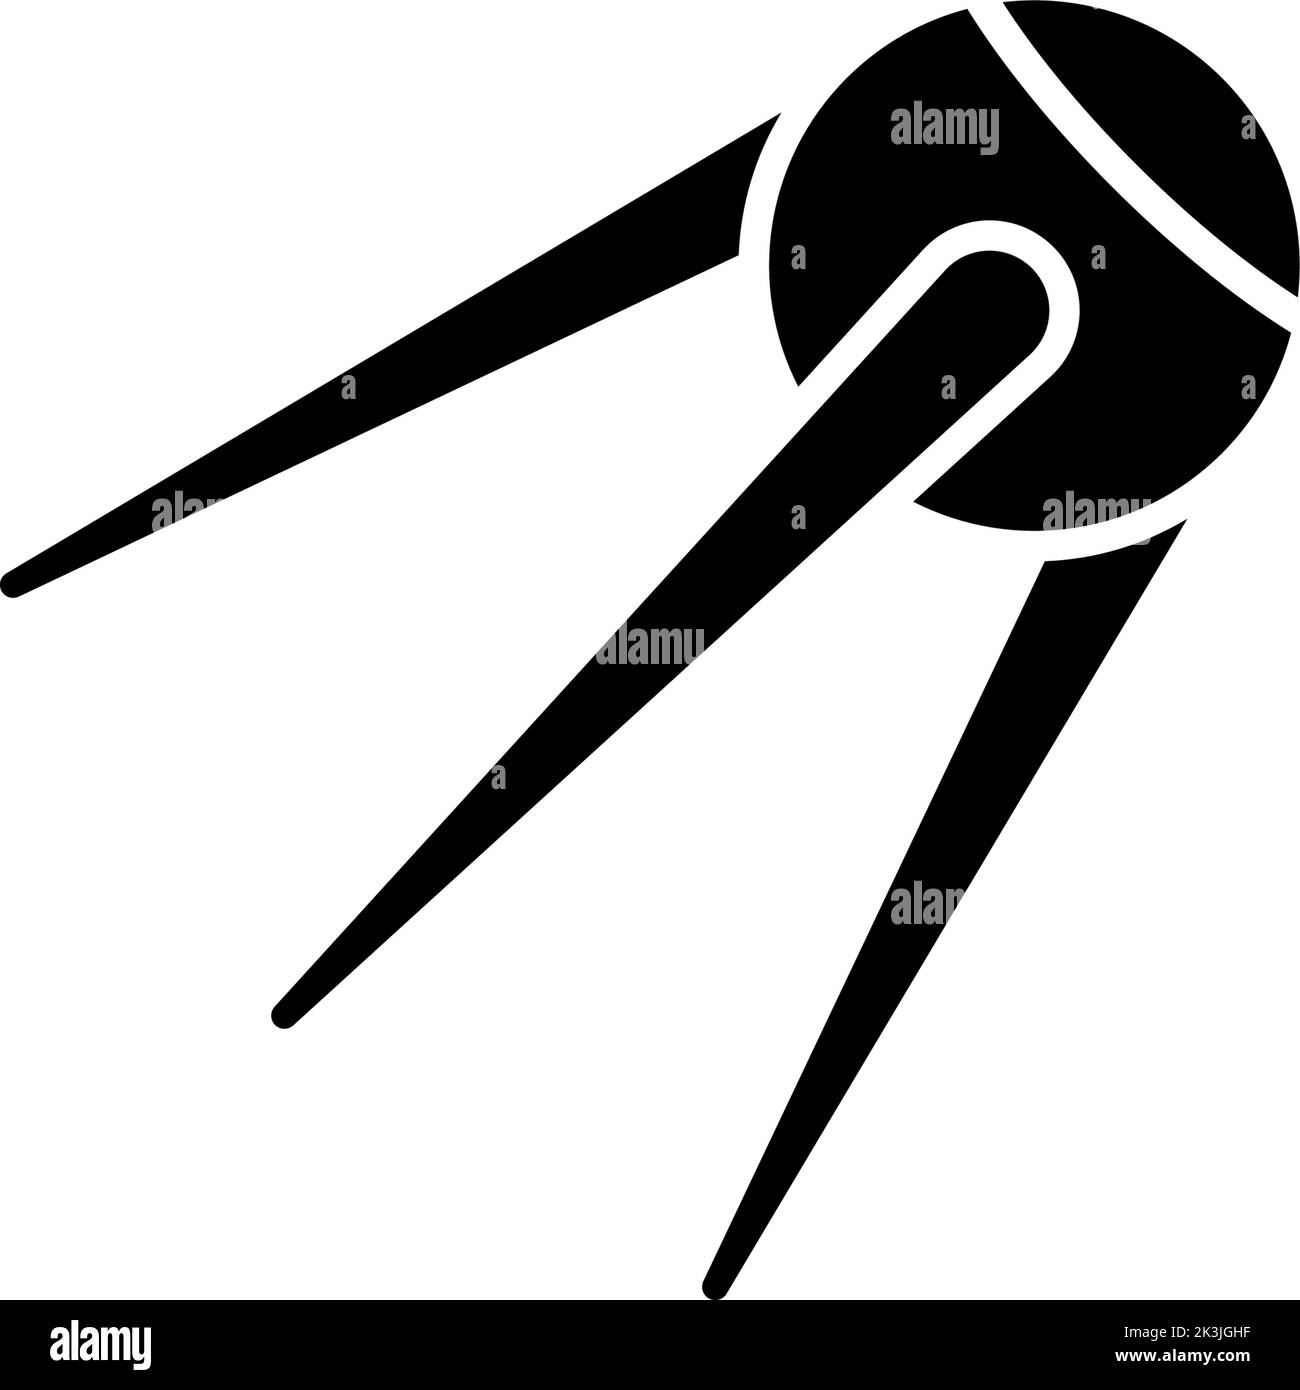 Old Satellite, Telecommunication Space Antenna. Flat Vector Icon illustration. Simple black symbol on white background. Old Satellite, Space Antenna s Stock Vector